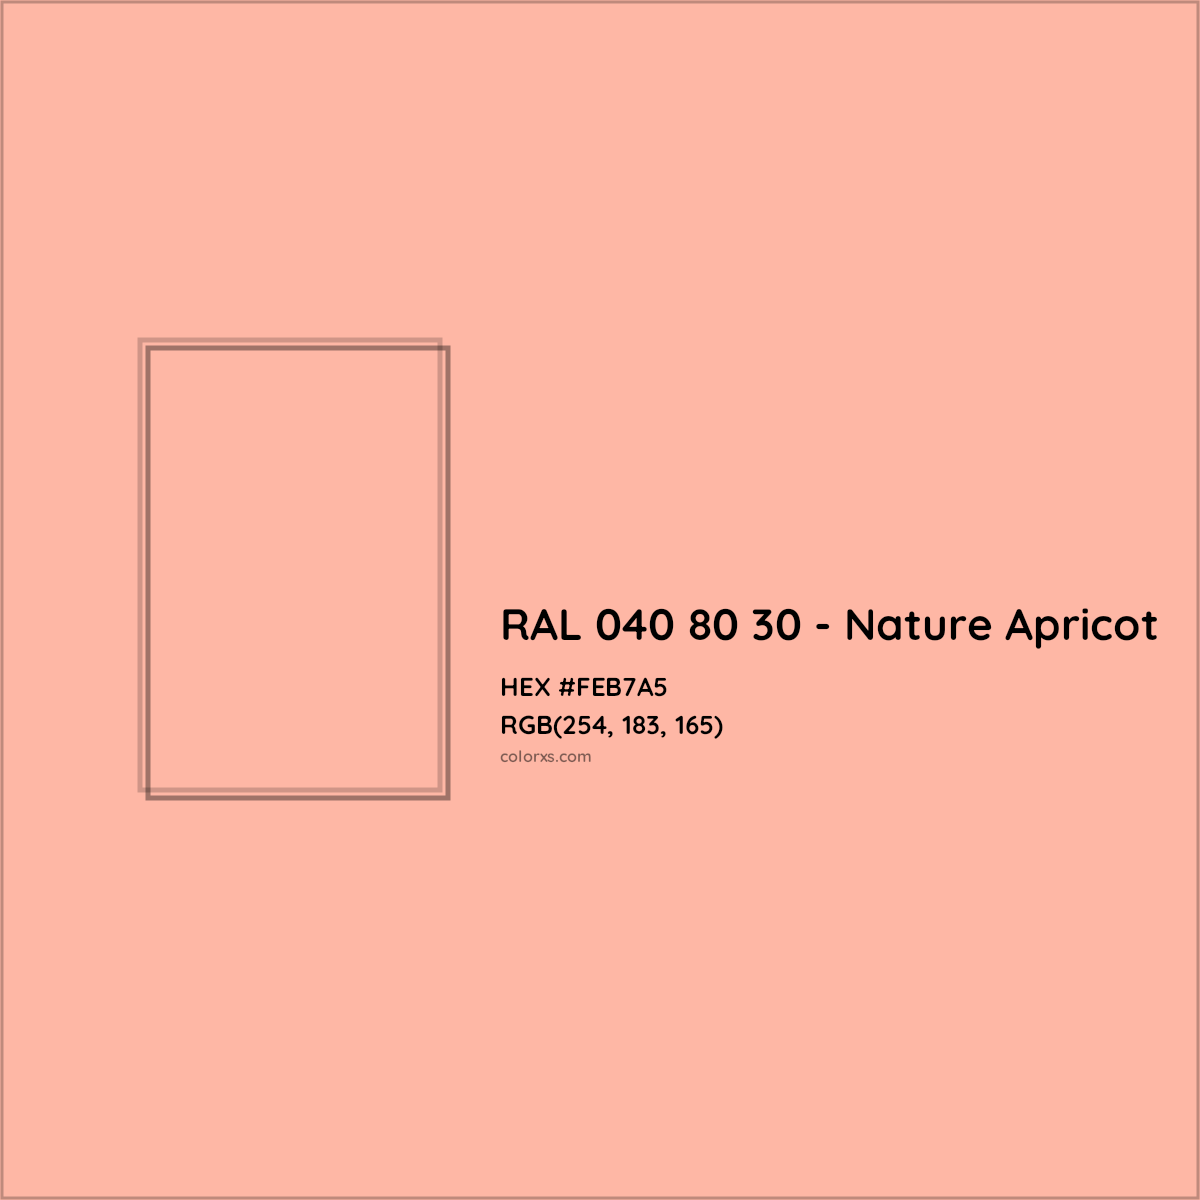 HEX #FEB7A5 RAL 040 80 30 - Nature Apricot CMS RAL Design - Color Code